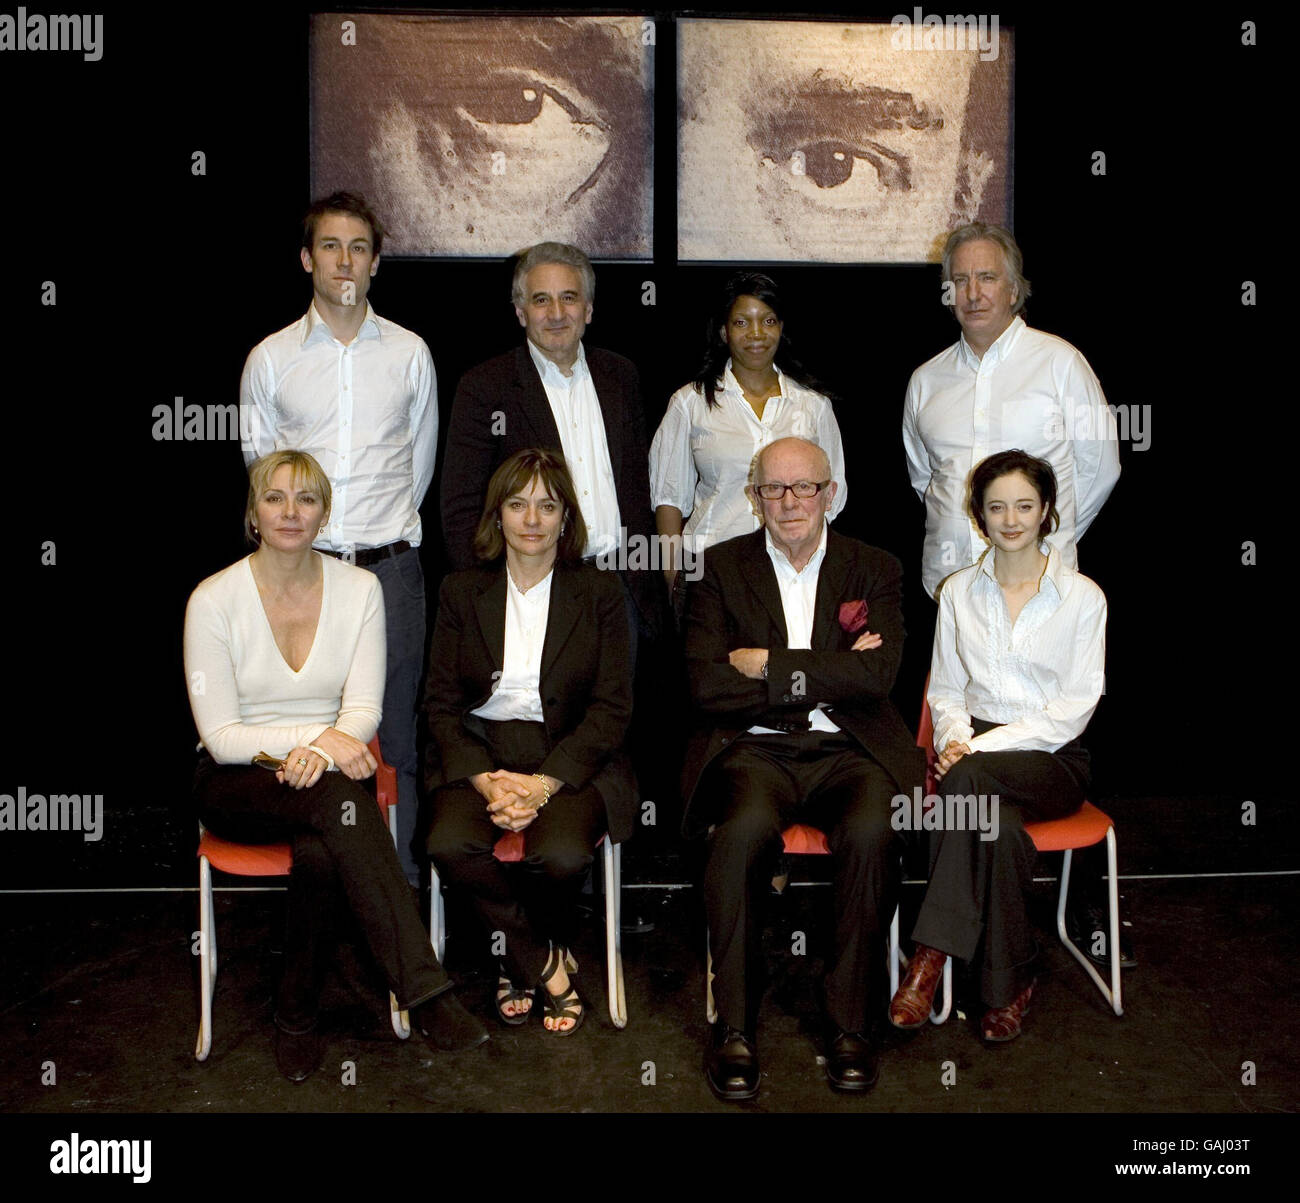 Actors (left-right, front row) Kim Cattrall, Diana Quick, Richard Wilson & Andrea Riseborough, (back row) Tobias Menzies, Henry Goodman, Jocelyn Jee Esien & Alan Rickman pose for the media after the Belarus Free Theatre Company production of 'Being Harold Pinter' at the Soho Theatre in central London. Stock Photo